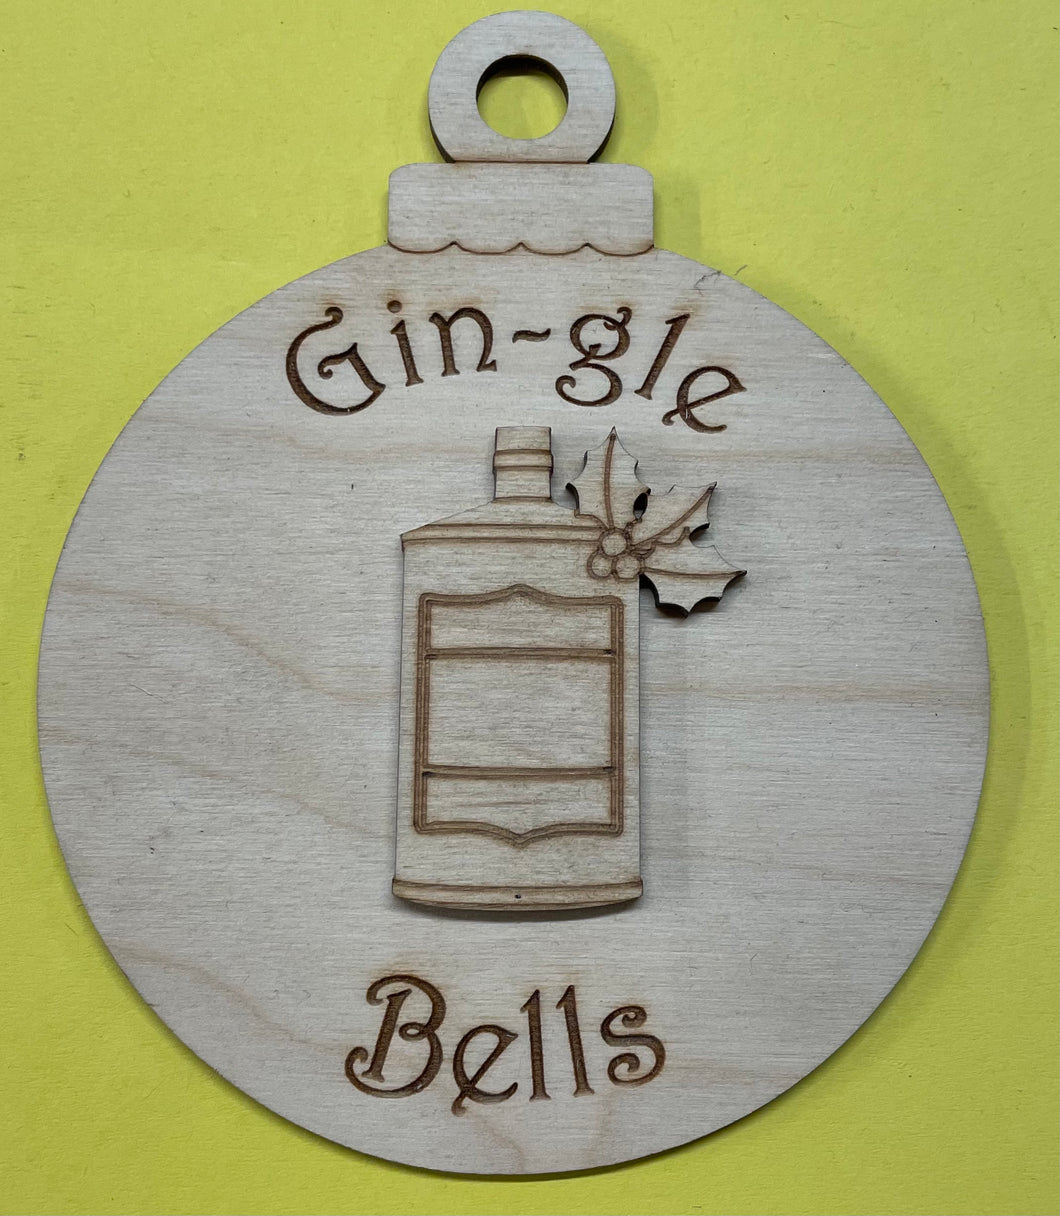 Gin-gle Baubles